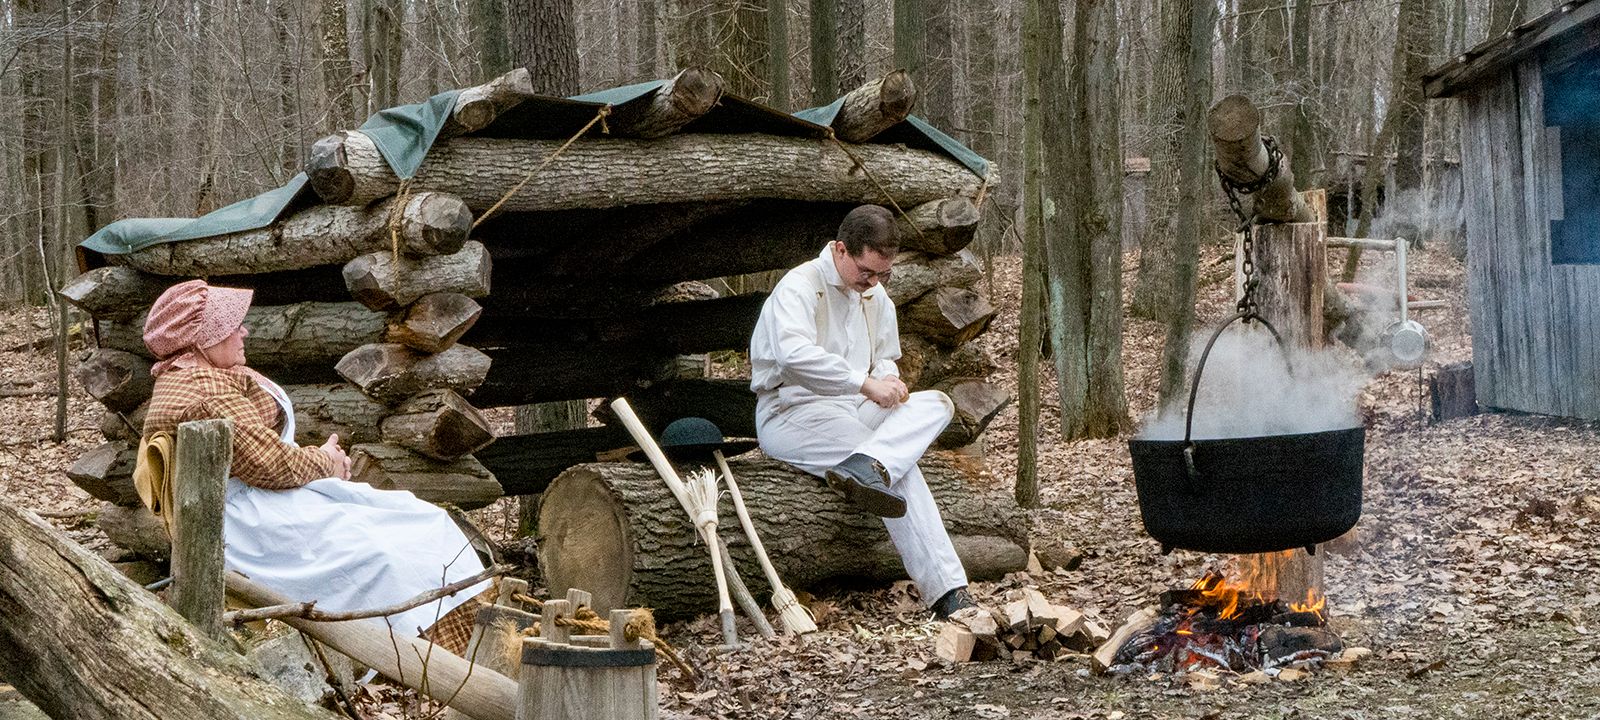 Two historical interpreters demonstrate boiling maple sap in an iron kettle near a log-crib lean-to.